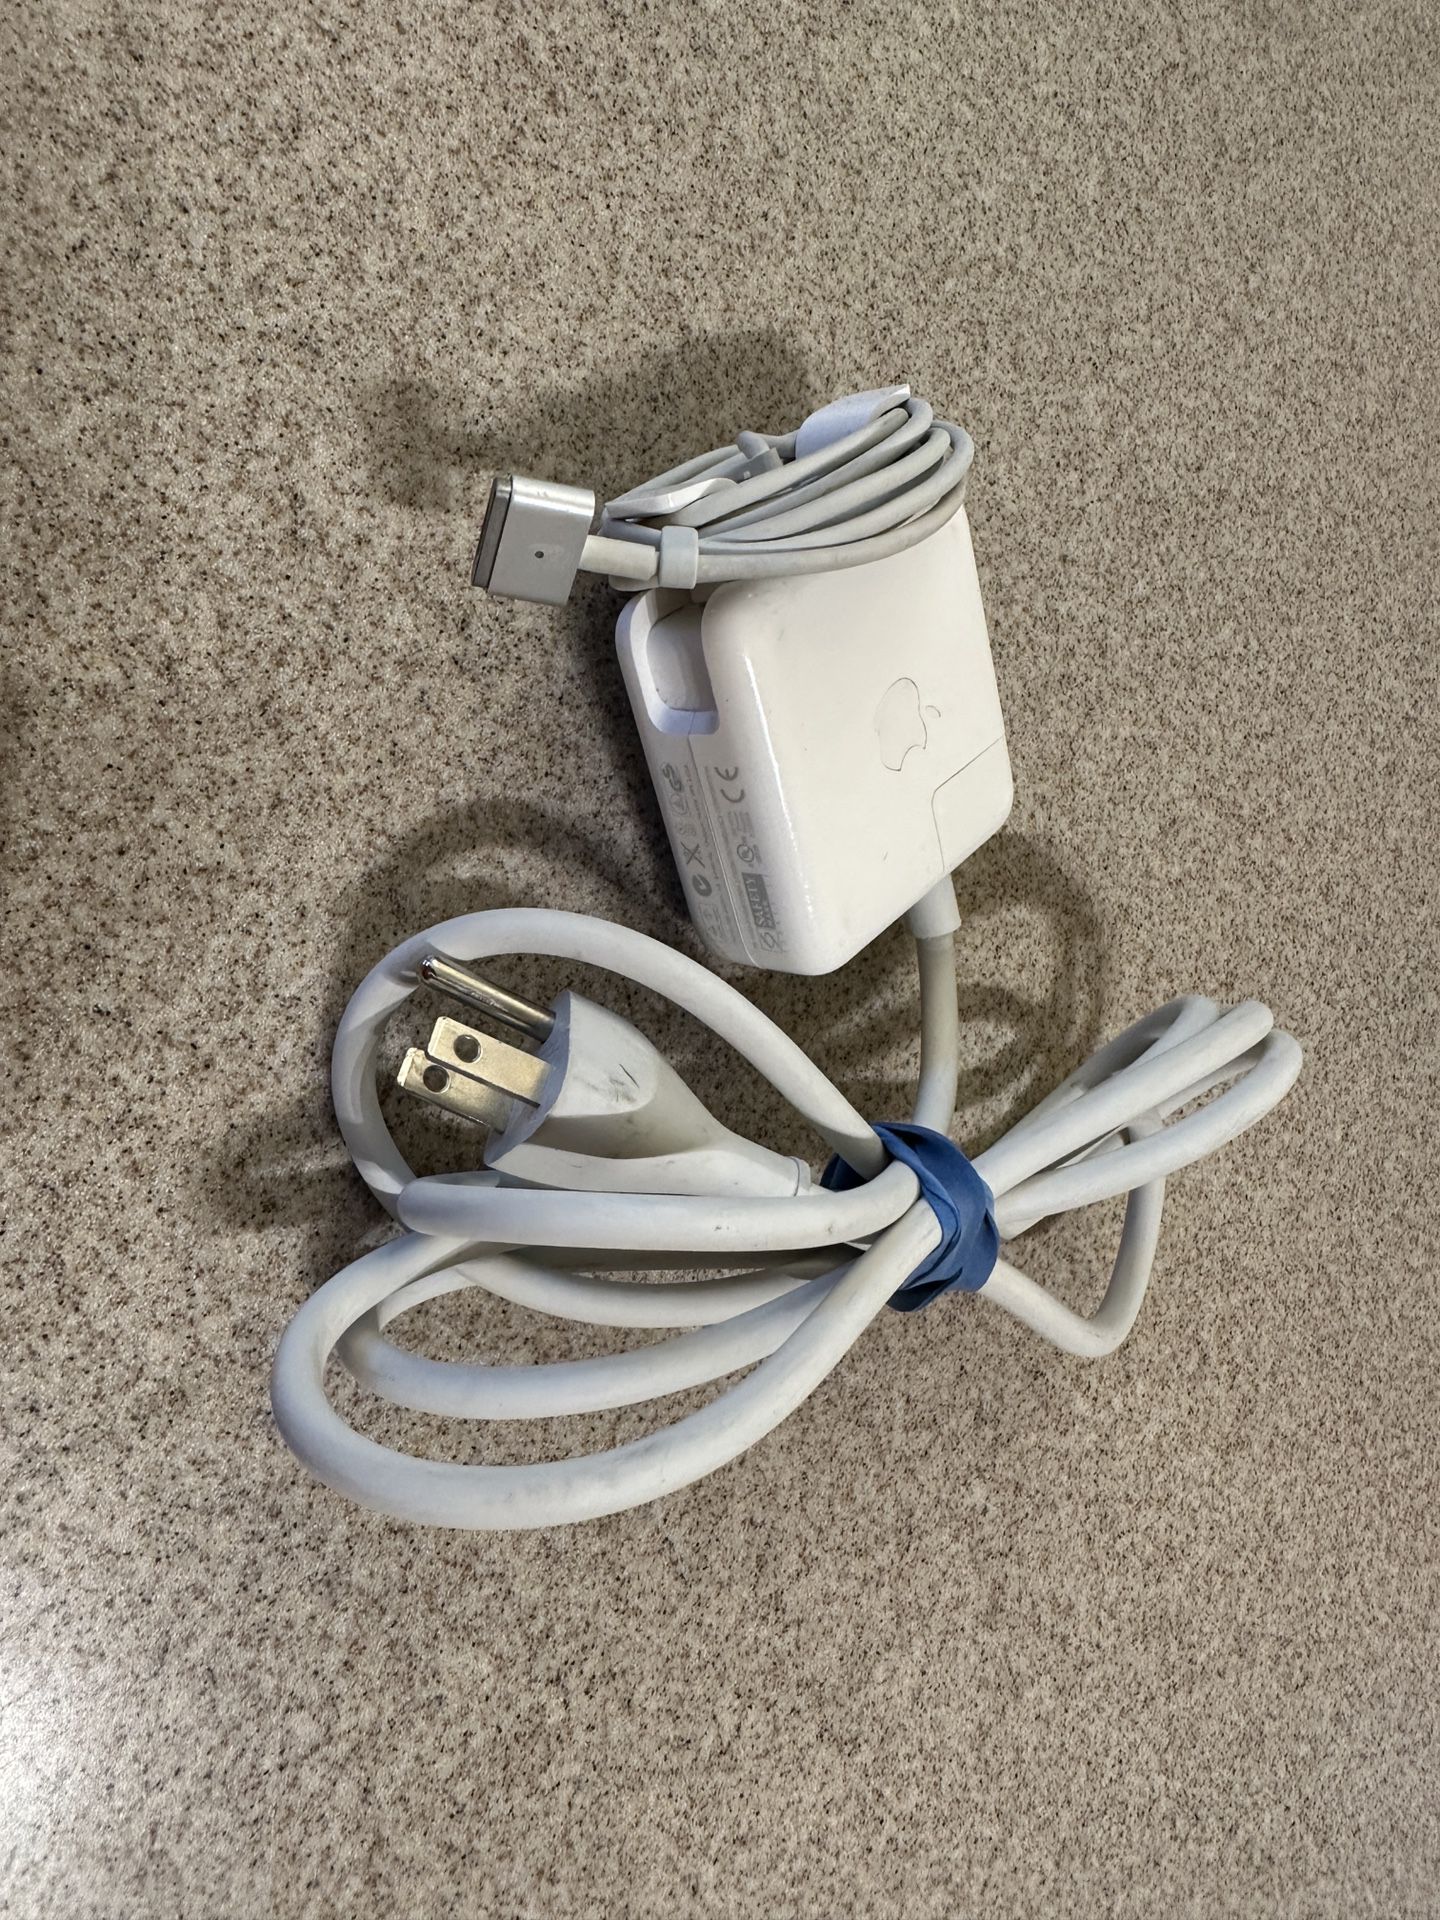 Apple 85W Magsafe 2 Power Adapter, Used